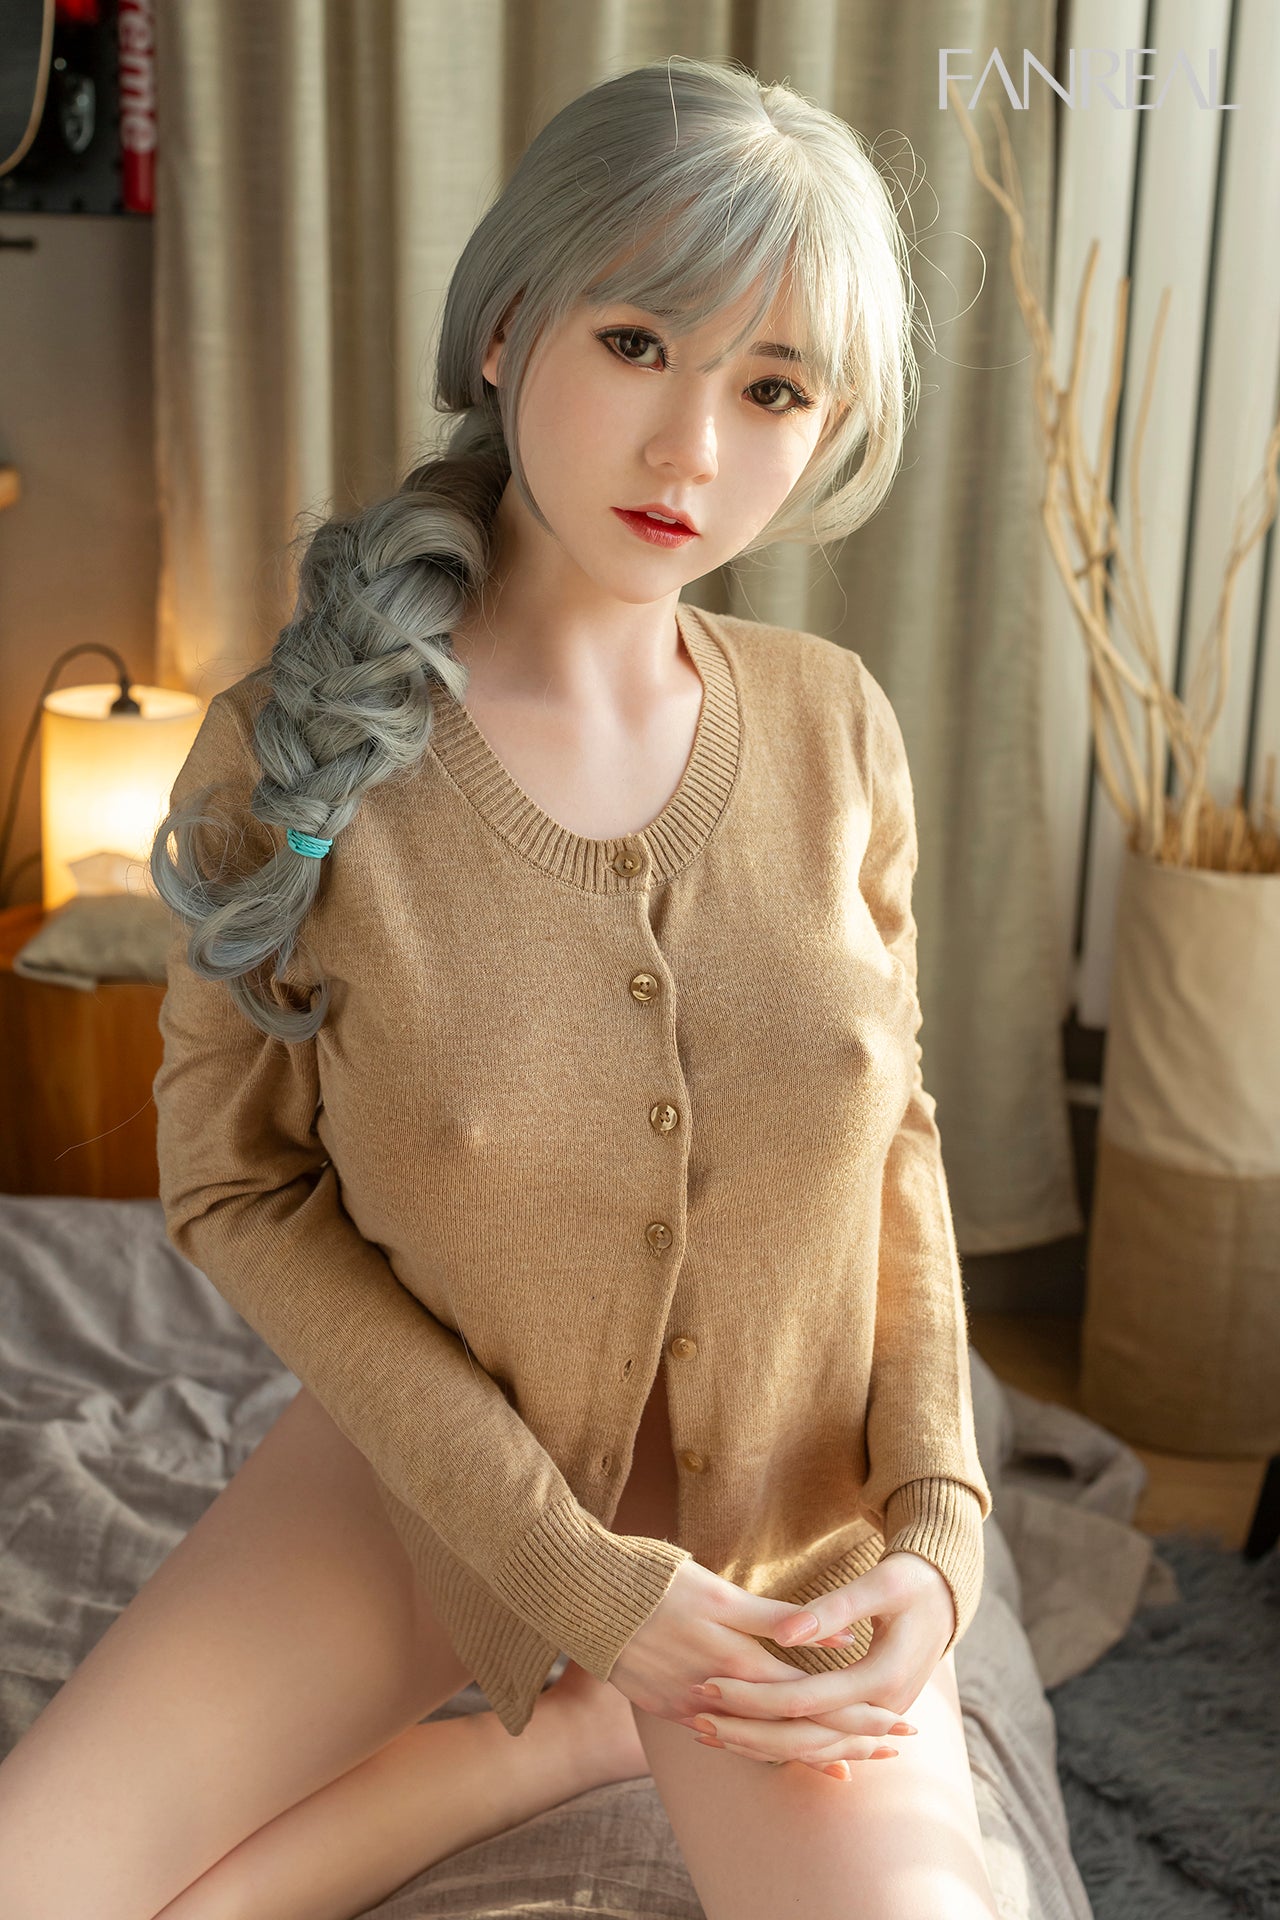 FANREAL DOLL 157 CM D Silicone - Qian | Buy Sex Dolls at DOLLS ACTUALLY